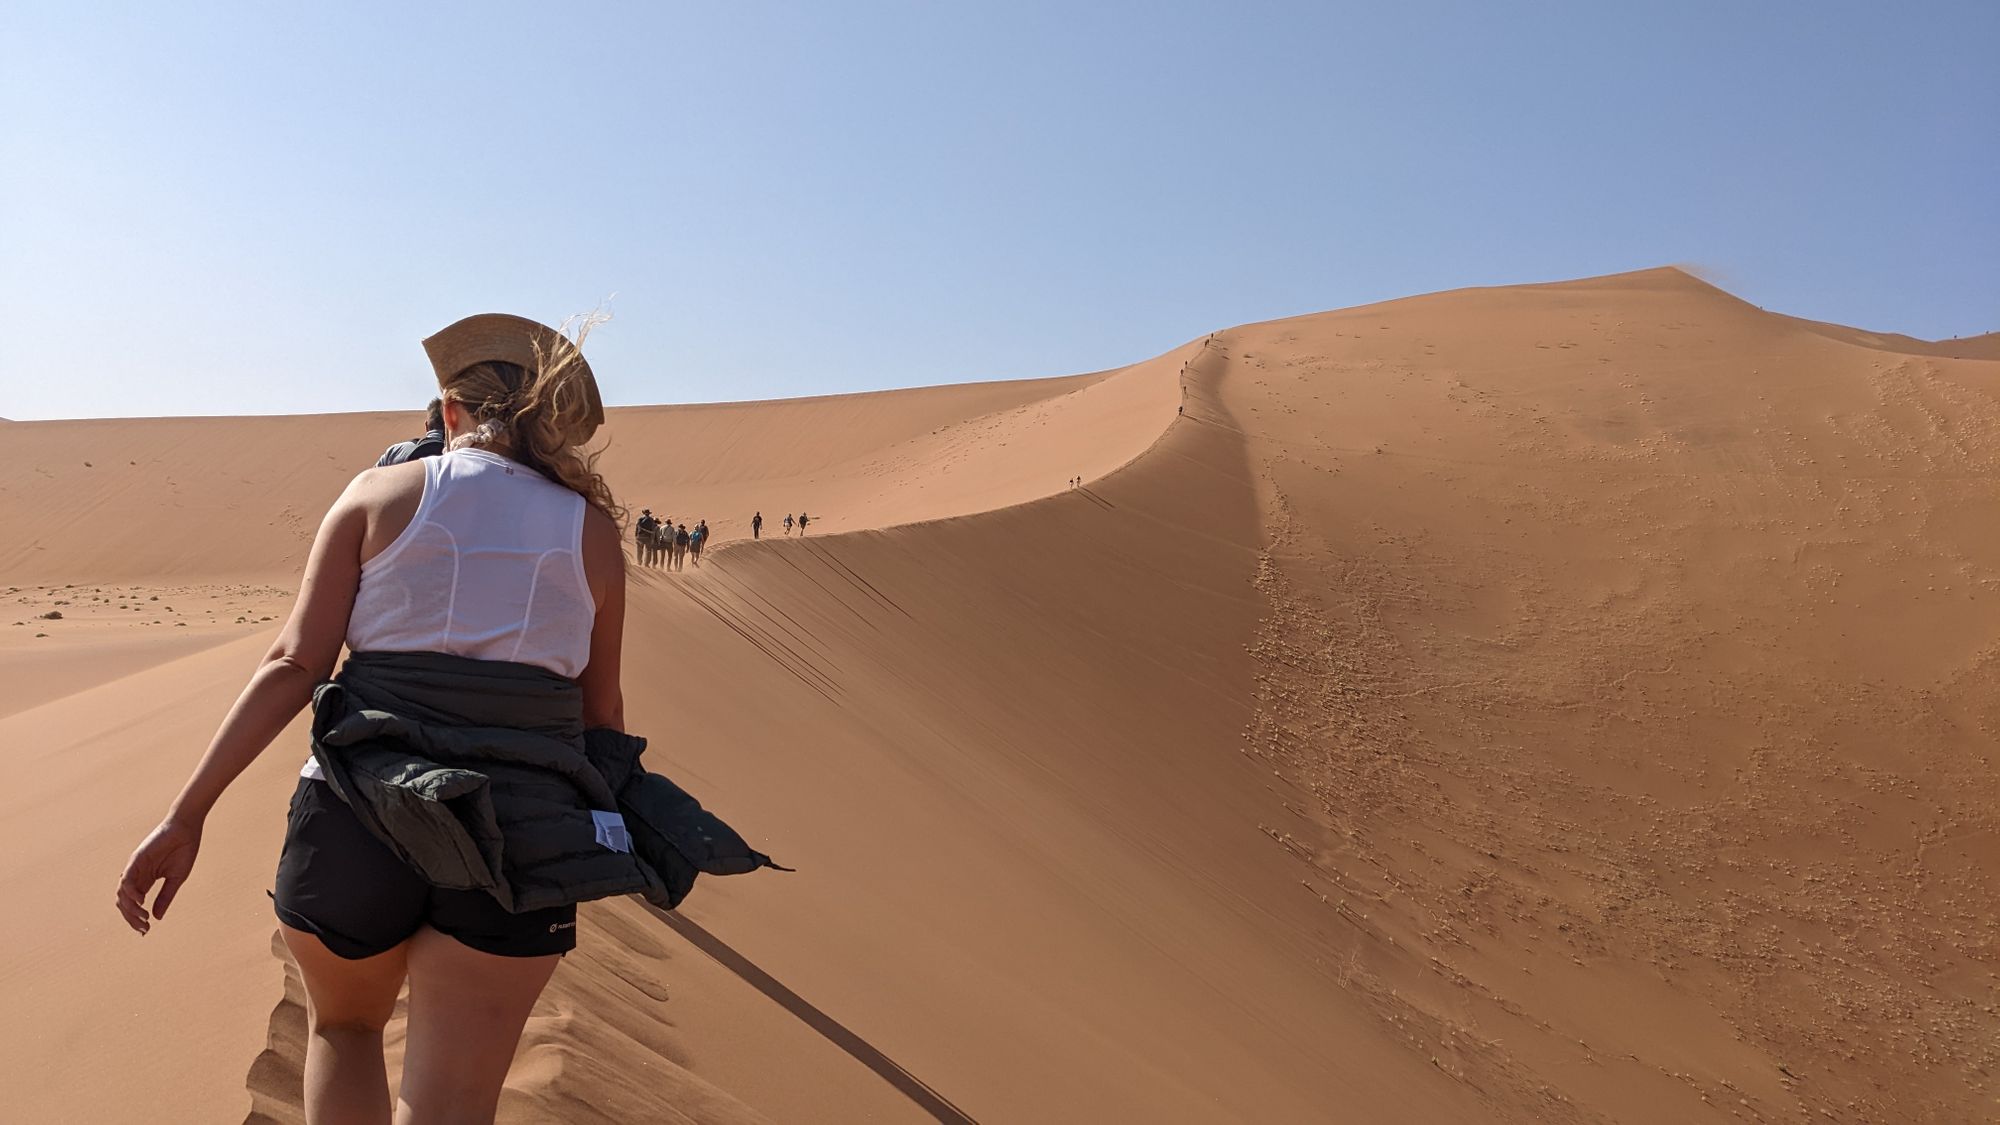 Hikers on the peak of a dune, Namibia.